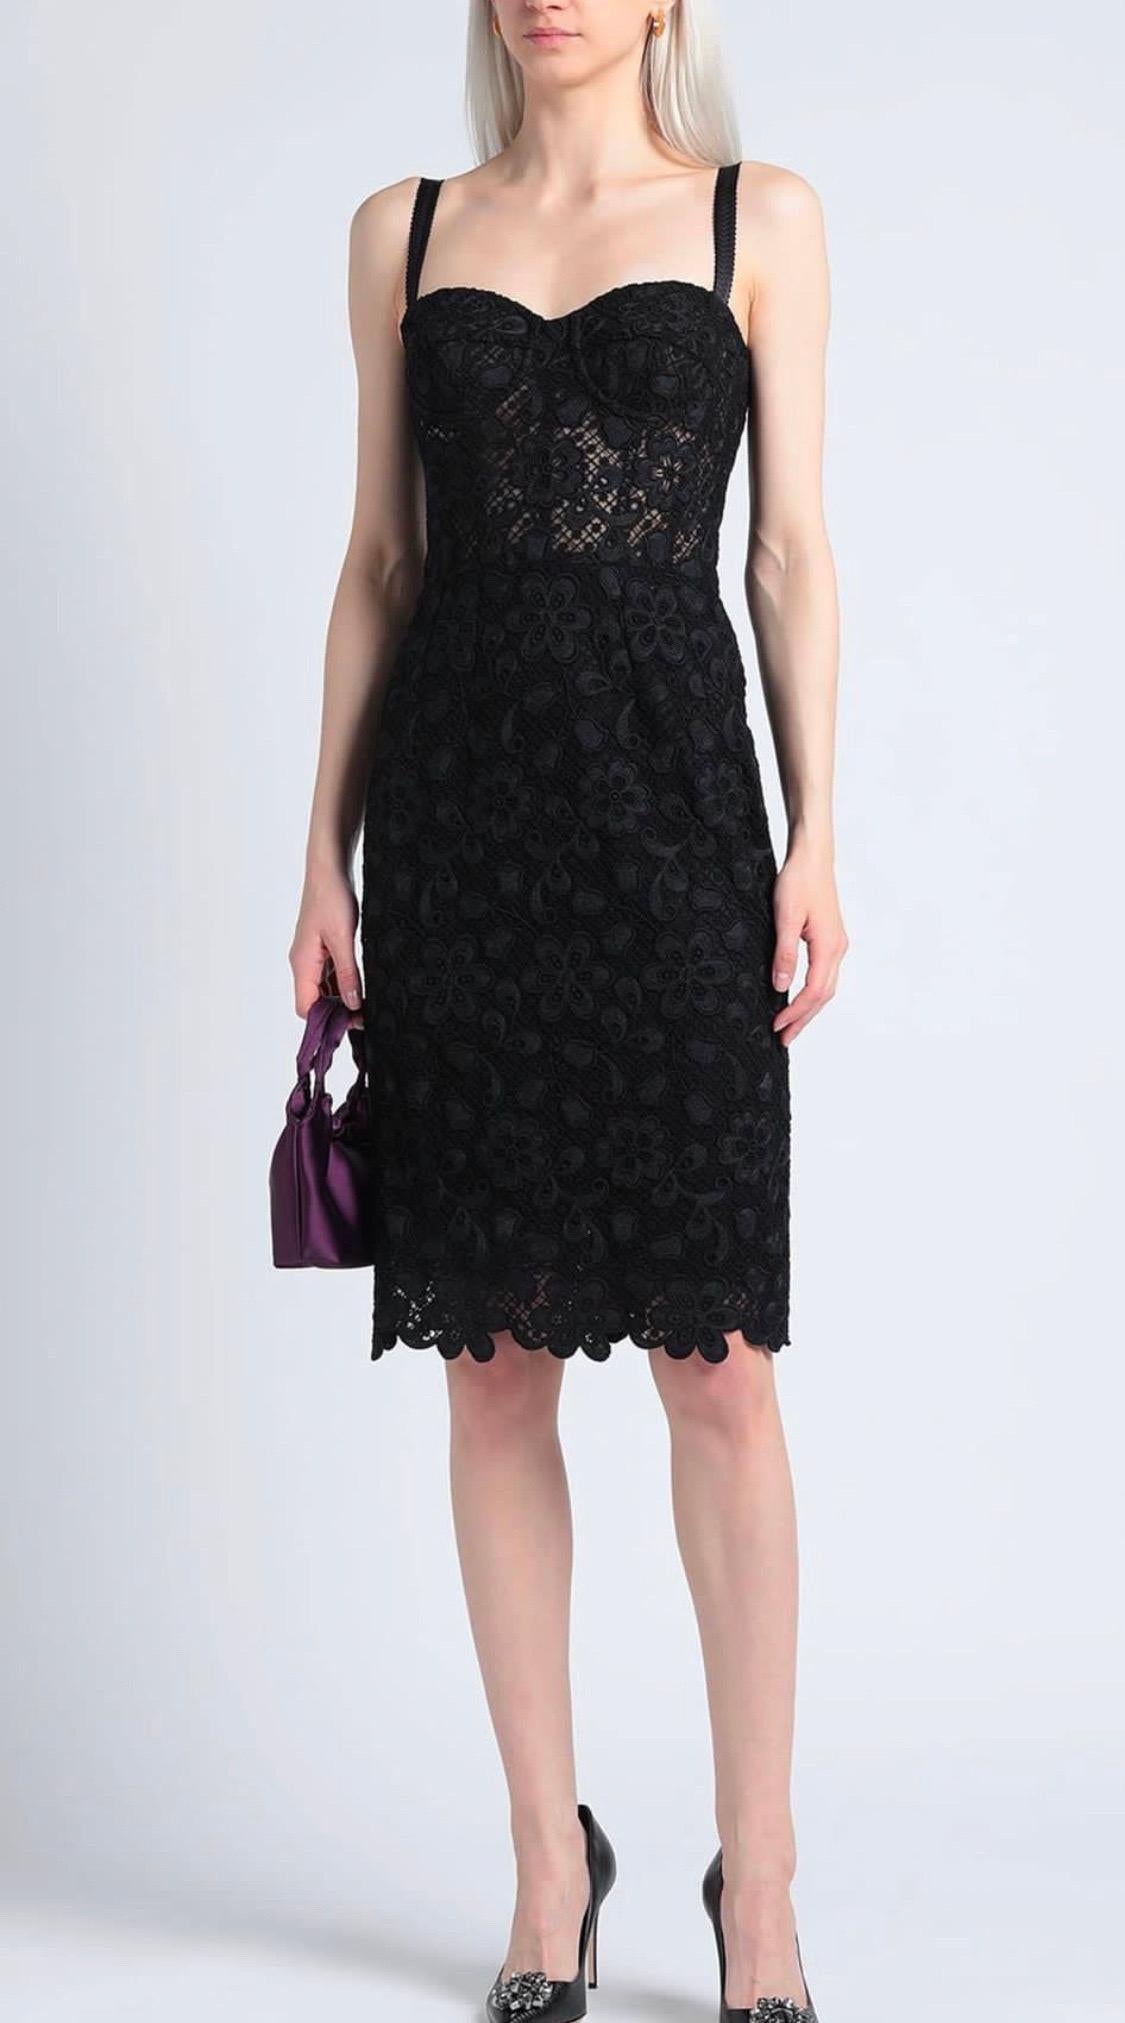 Black Dolce & Gabbana sleeveless sheath dress is
overlaid in delicate floral lace